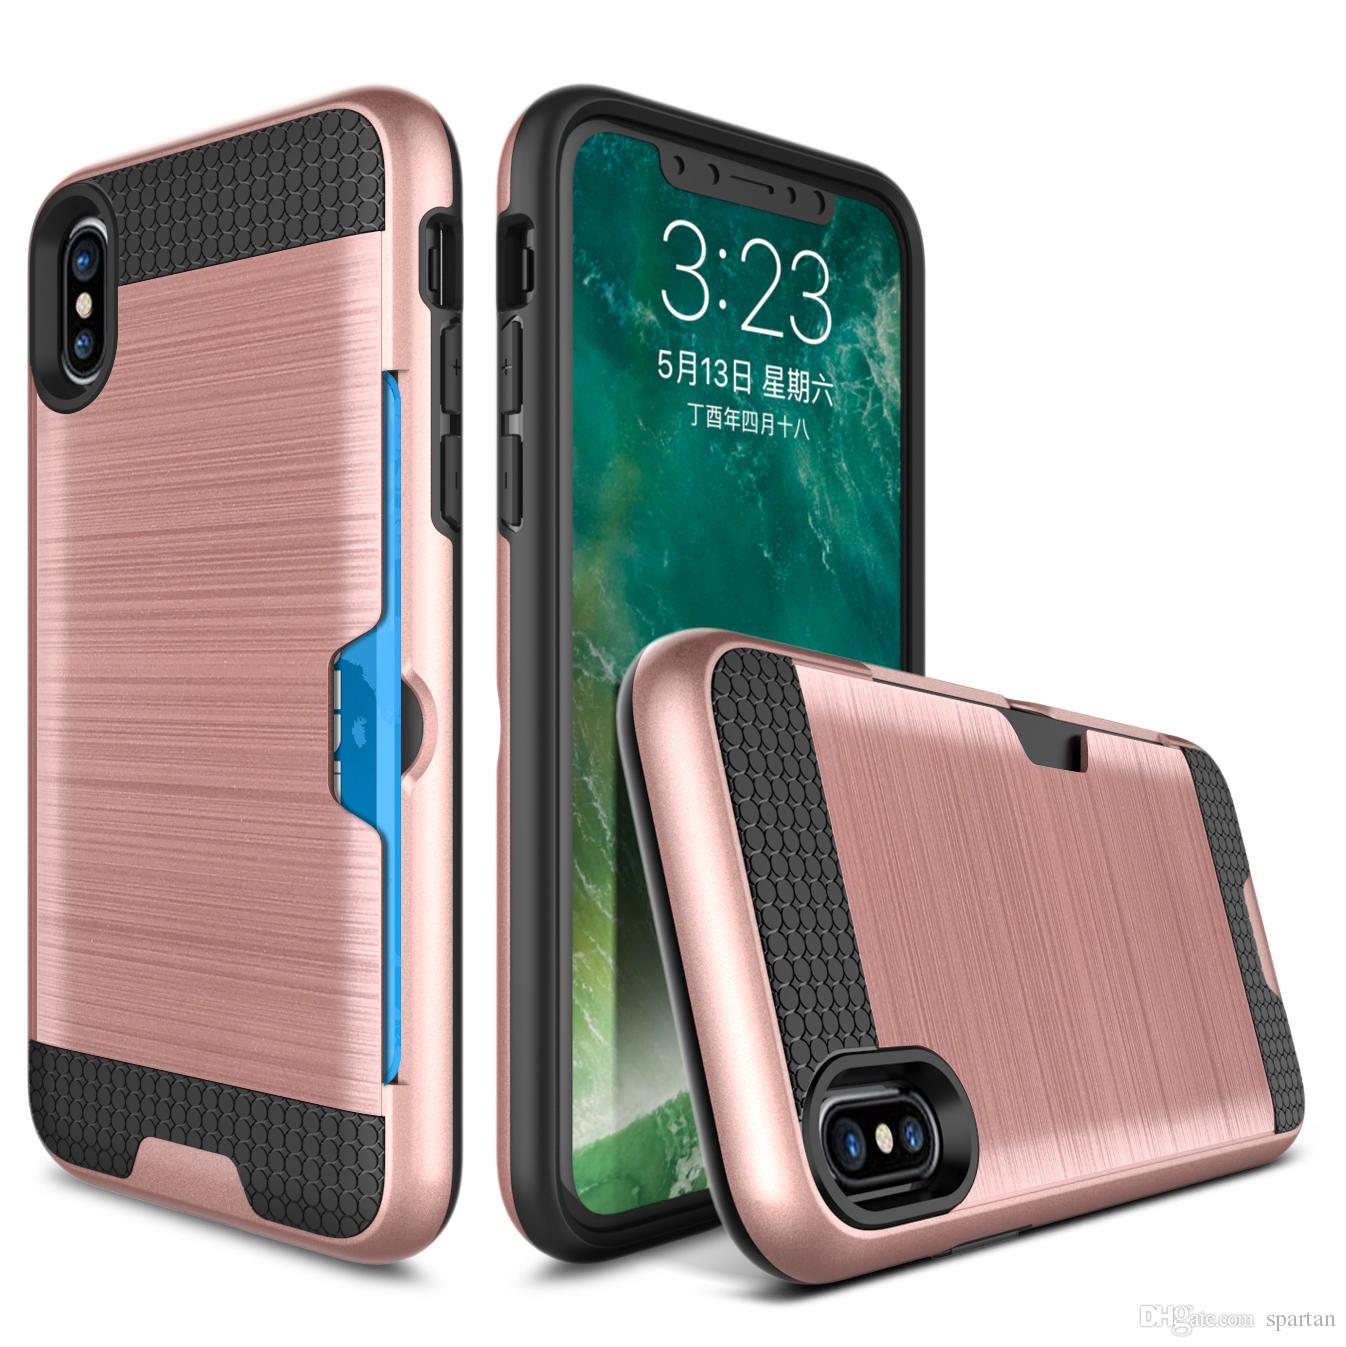 Hybrid Defender Protector Brushed Metal Armor Cases for iphone X 8 7 Plus 6s samsung note 8 s8